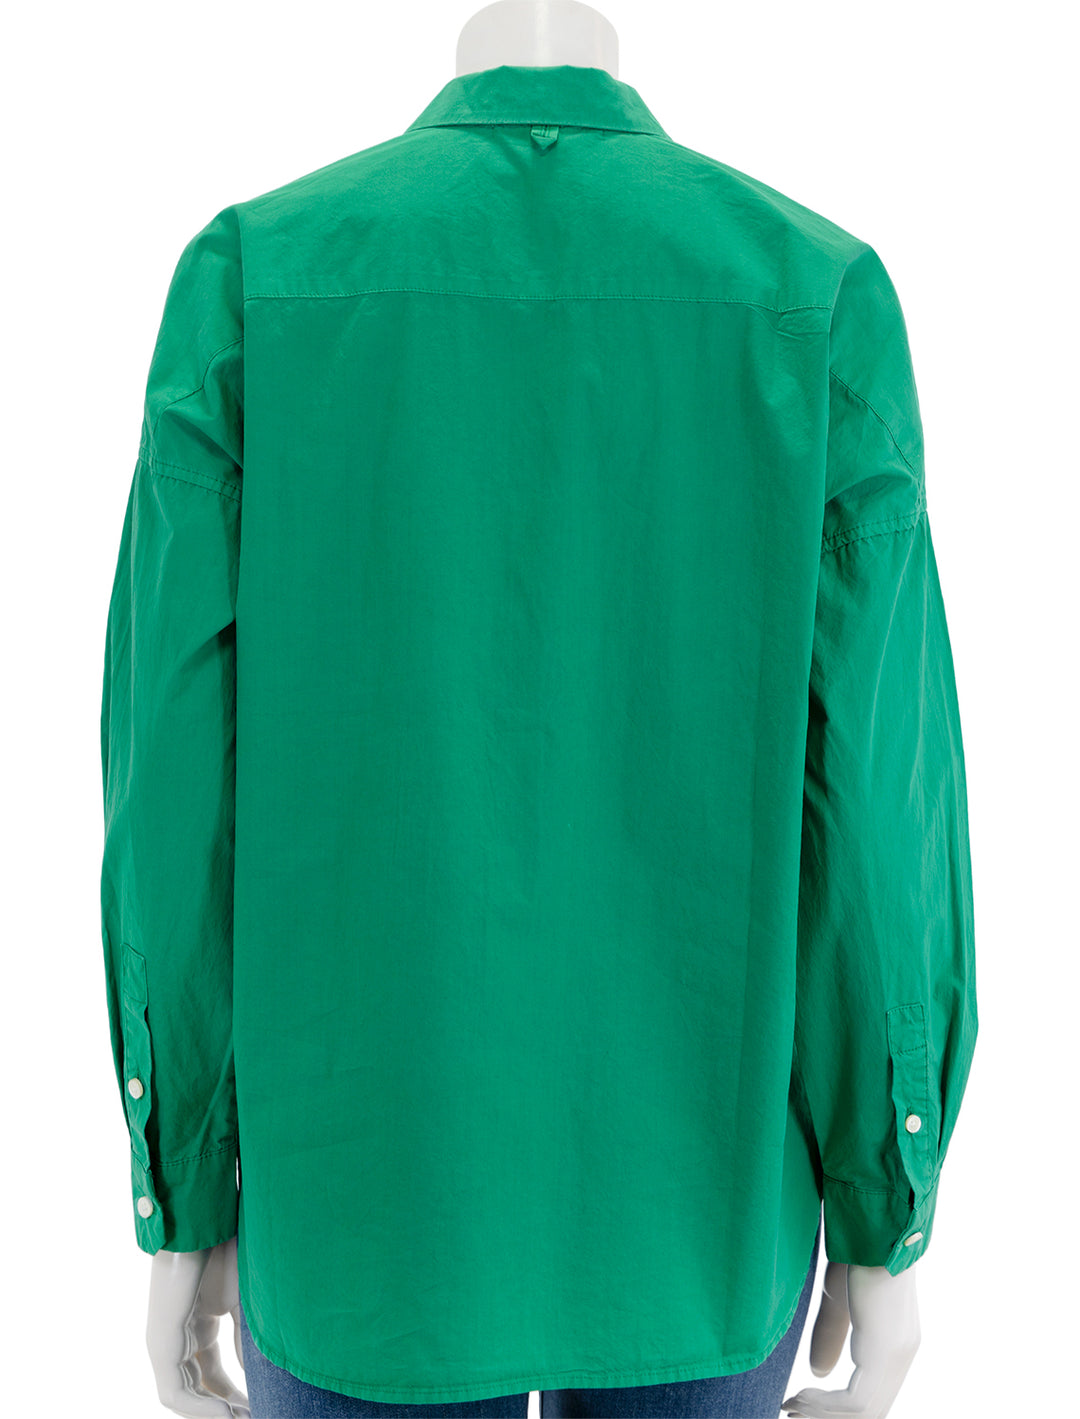 Back view of Alex Mill's standard shirt in spring green.